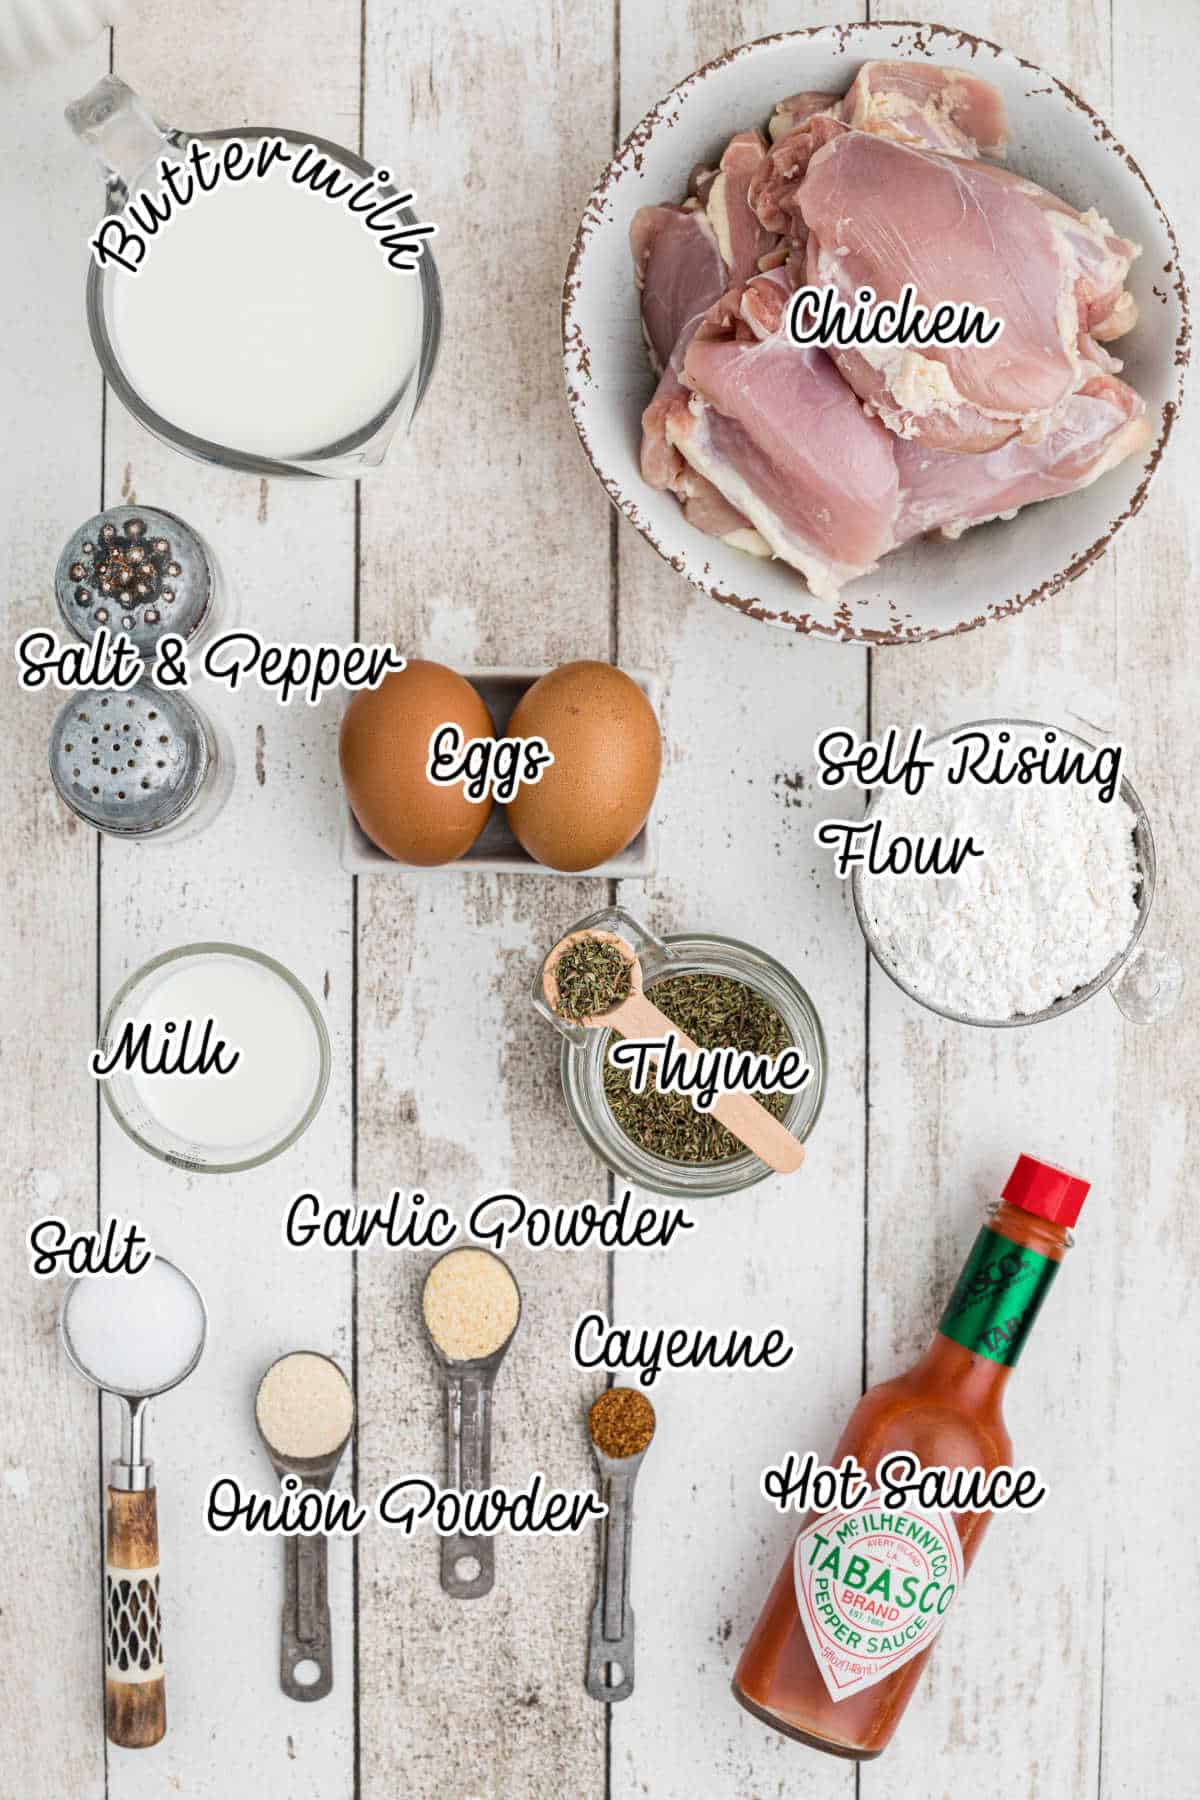 ingredients needed to make a copycat version of Bojangles fried chicken recipe.